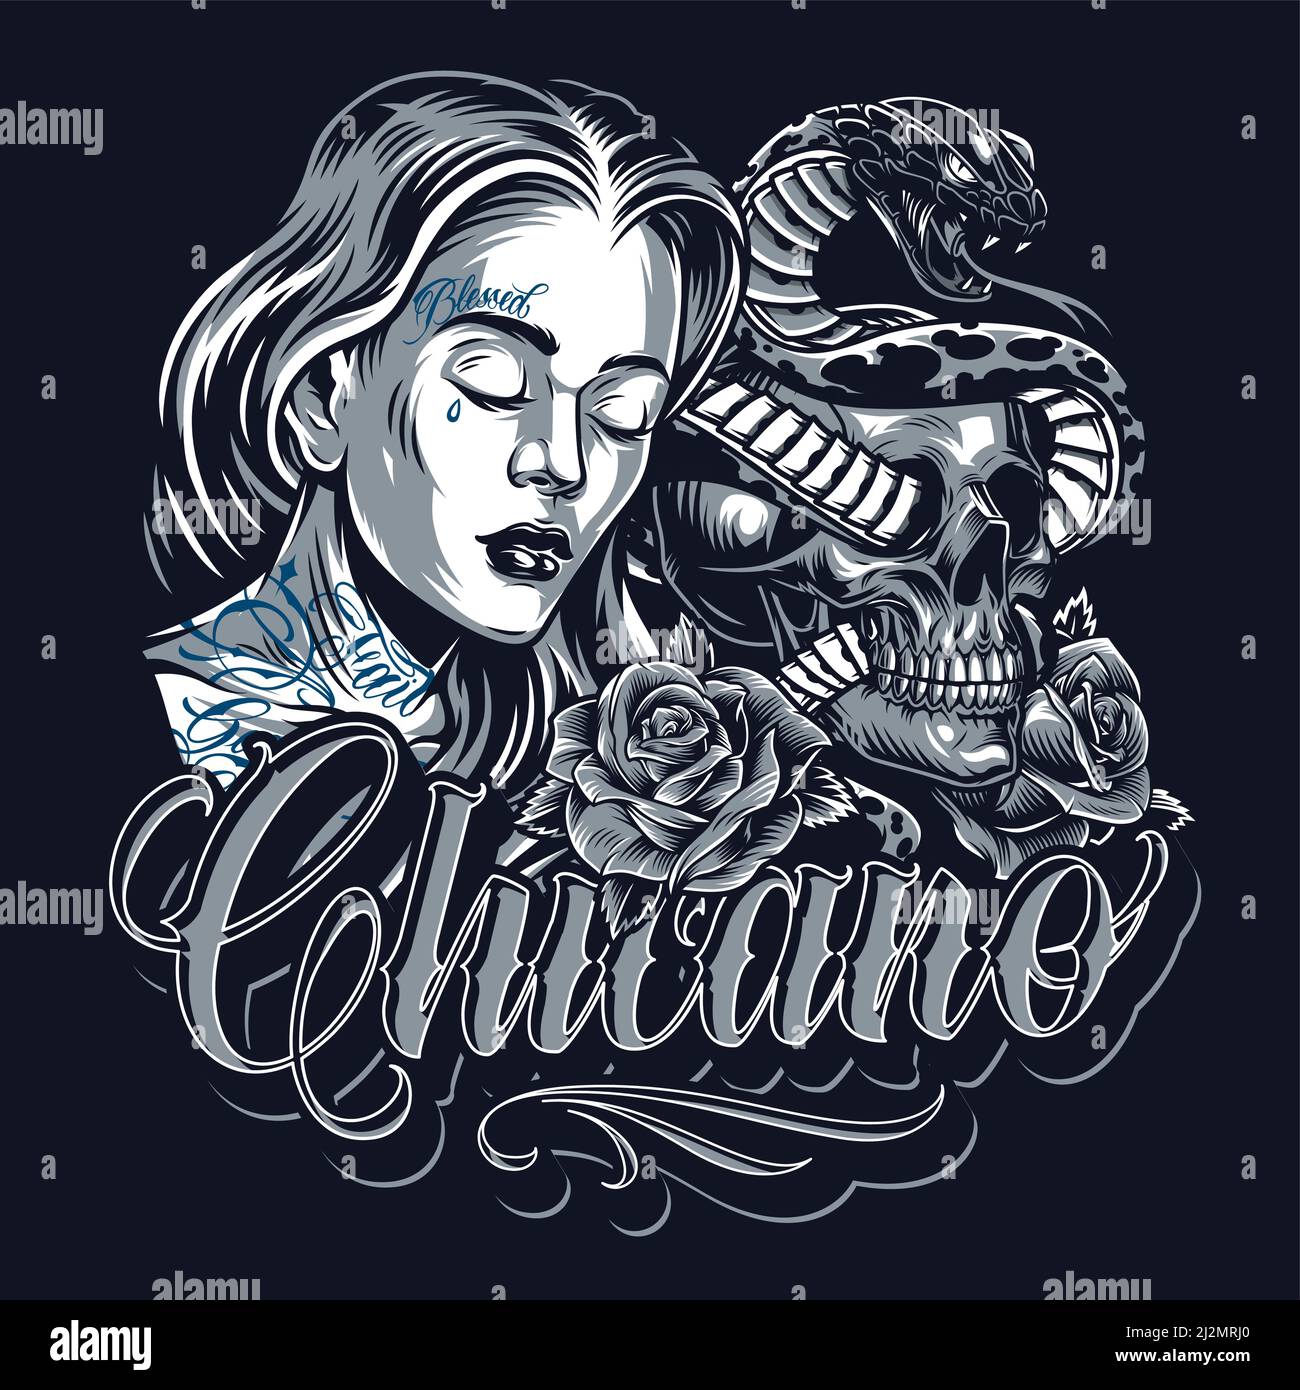 Chicano tattoo vintage template with sad beautiful girl cat skull roses poisonous snake entwined with skull on dark background isolated vector illustr Stock Vector